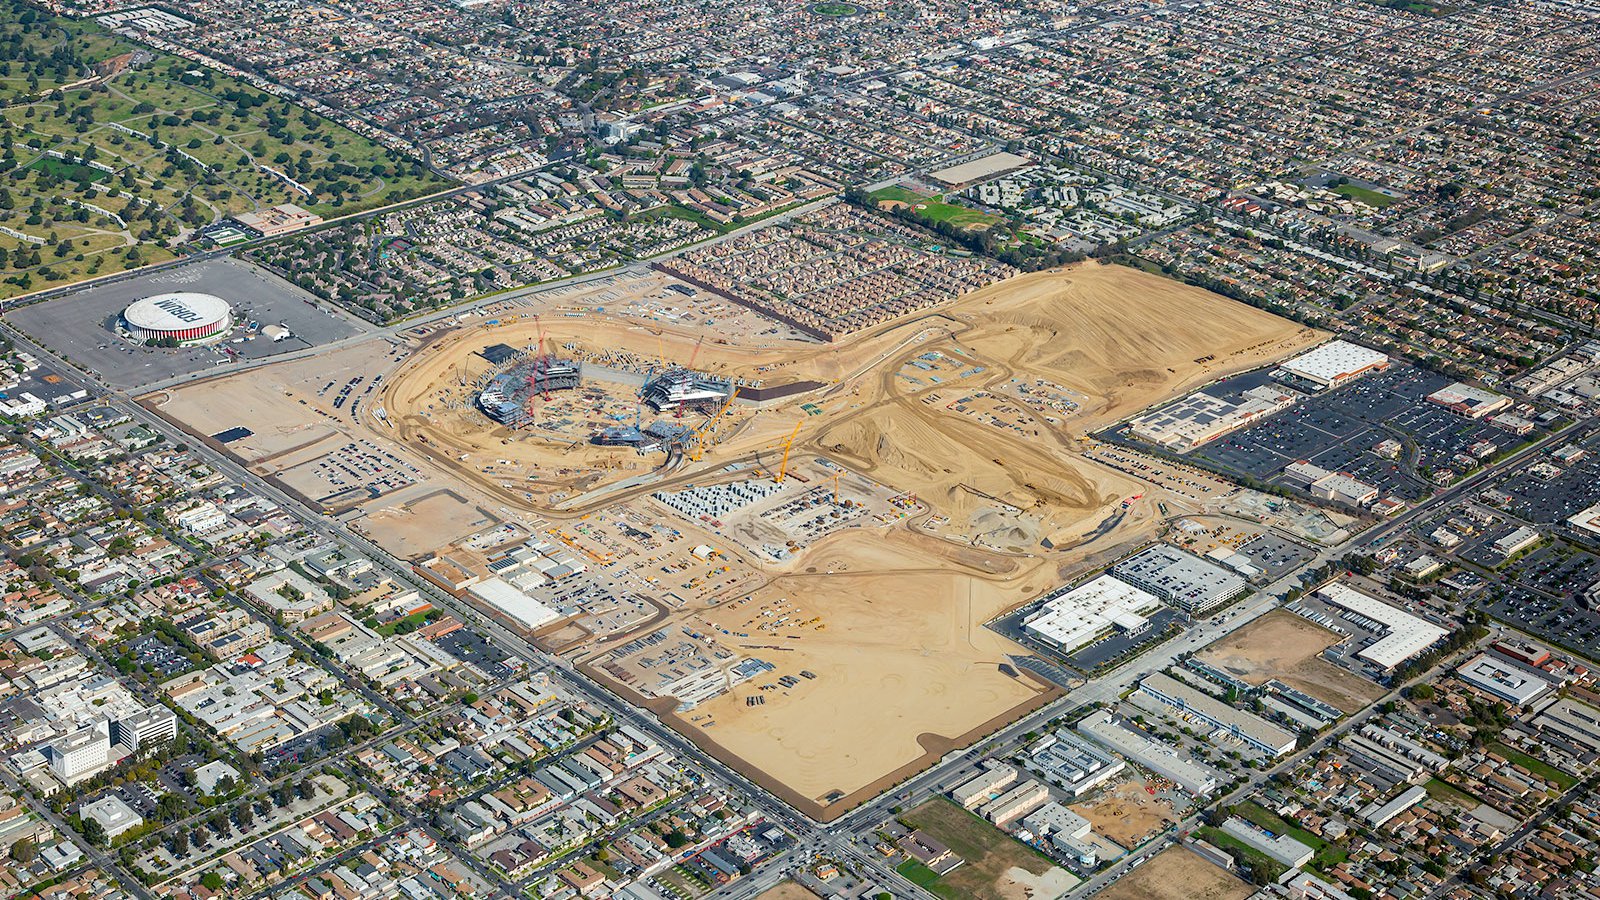 Blog image of the SoFi Stadium construction in January 2018 at Hollywood Park in Inglewood, California